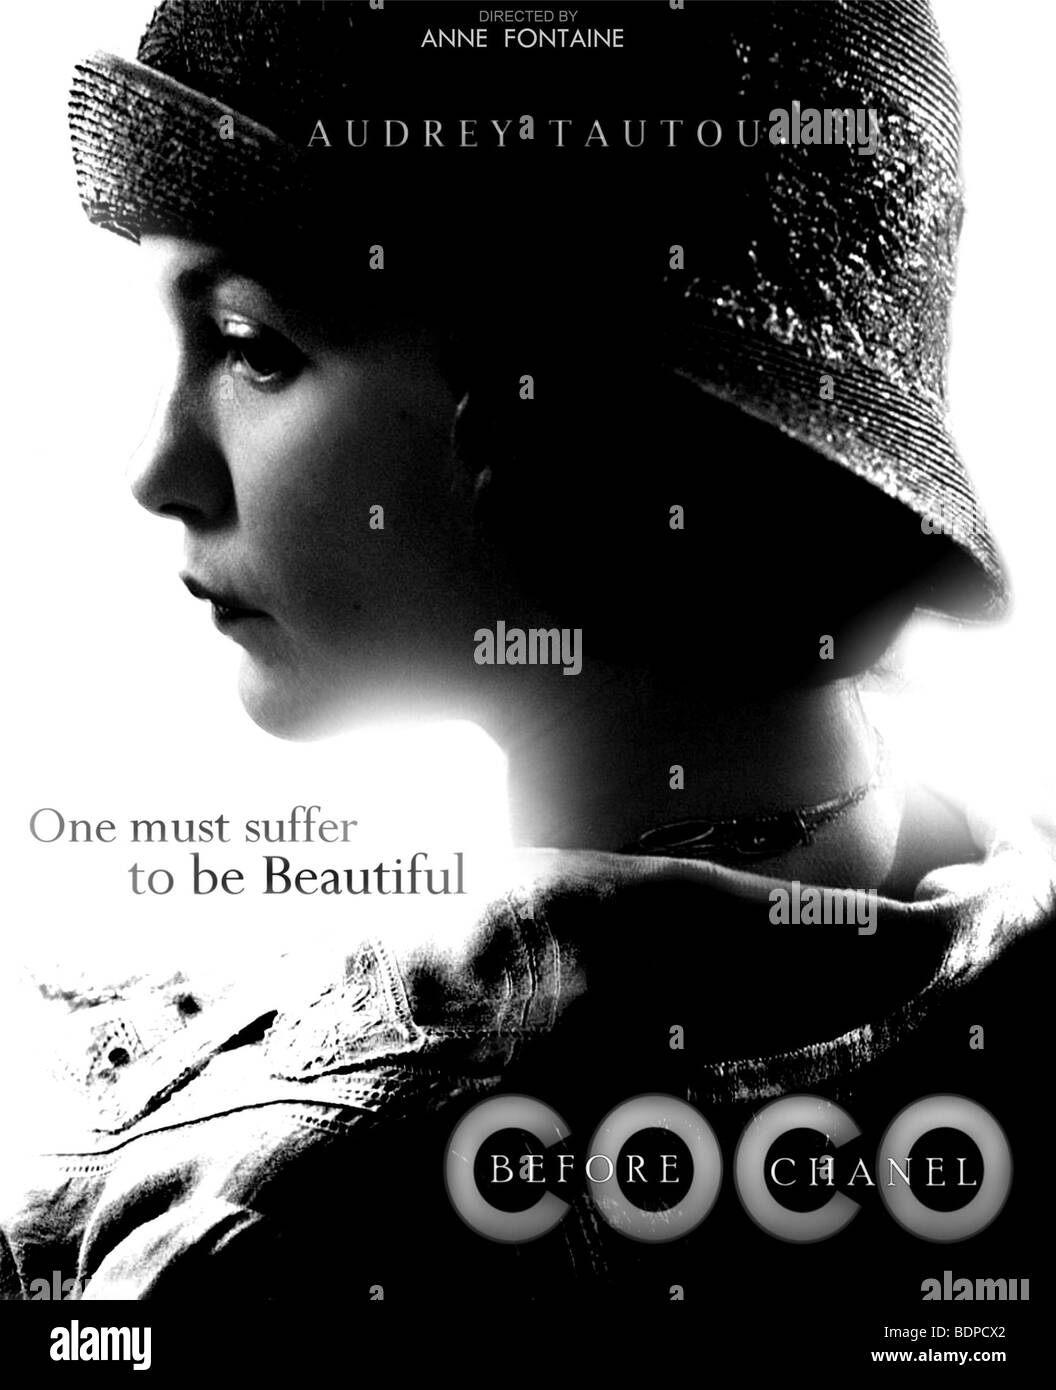 Coco avant Chanel before Chanel Year : Director : Fontaine Audrey Movie poster (USA Stock Photo - Alamy